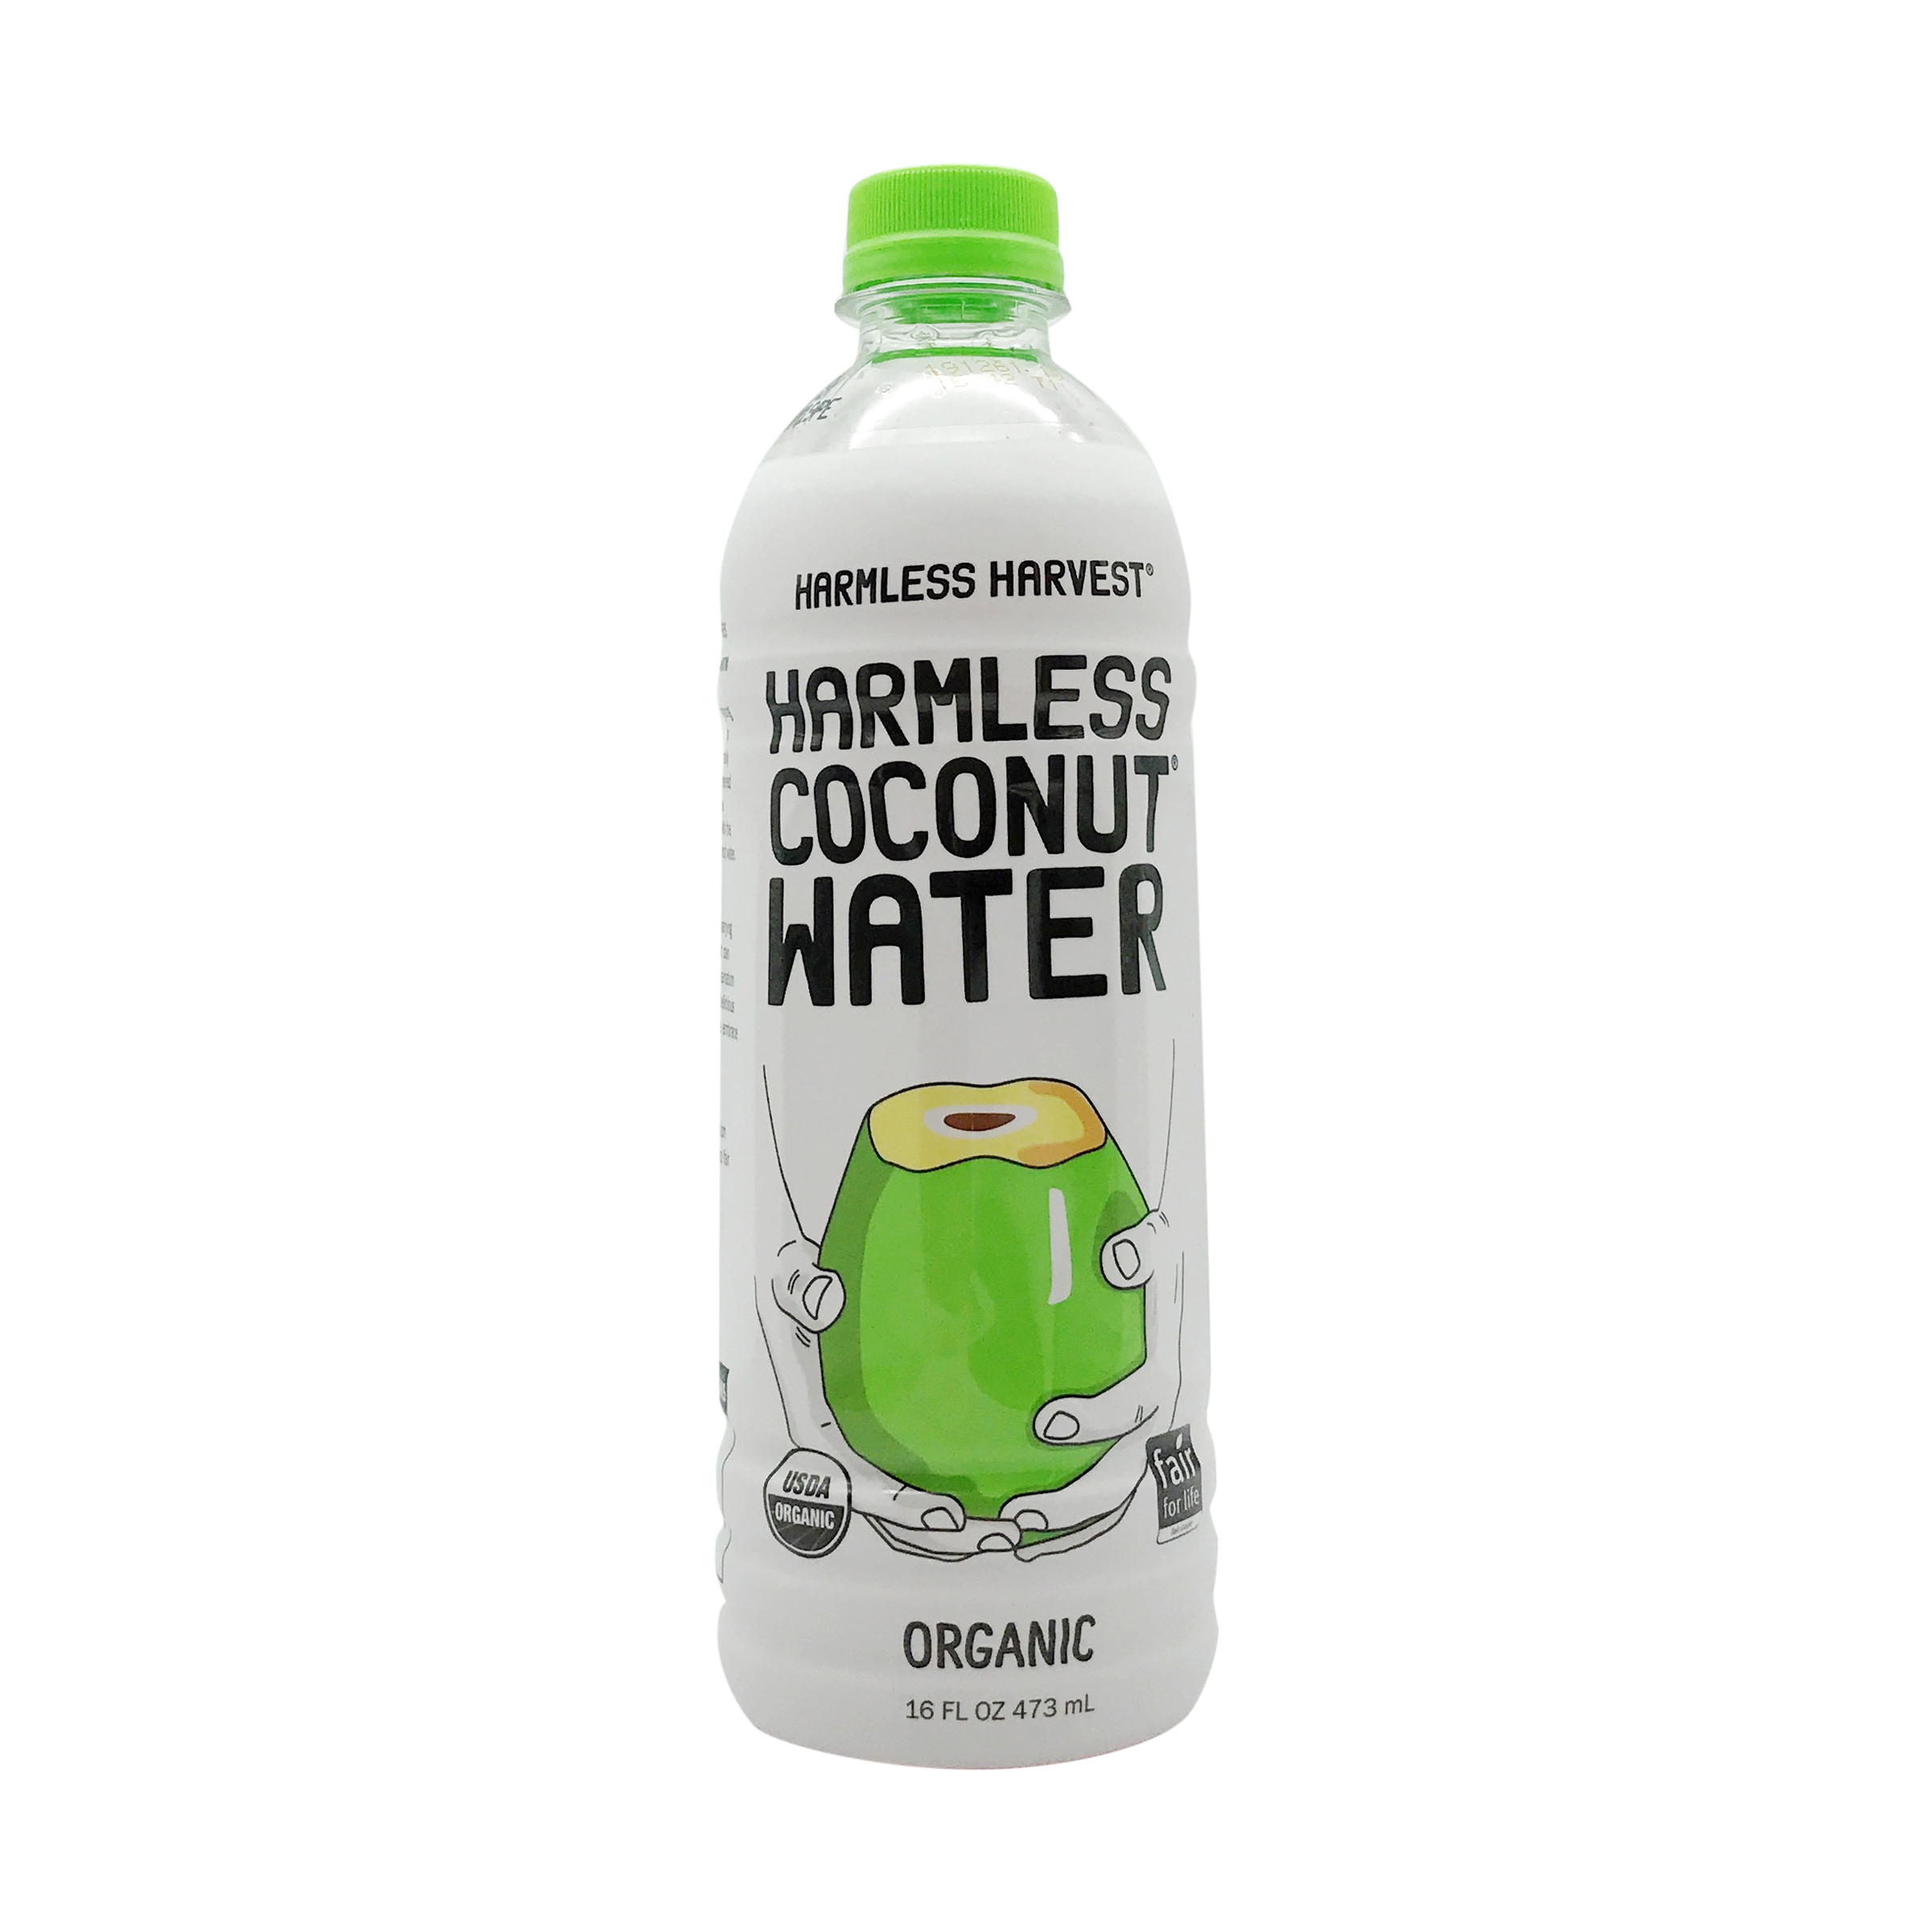 case of harmless harvest coconut water